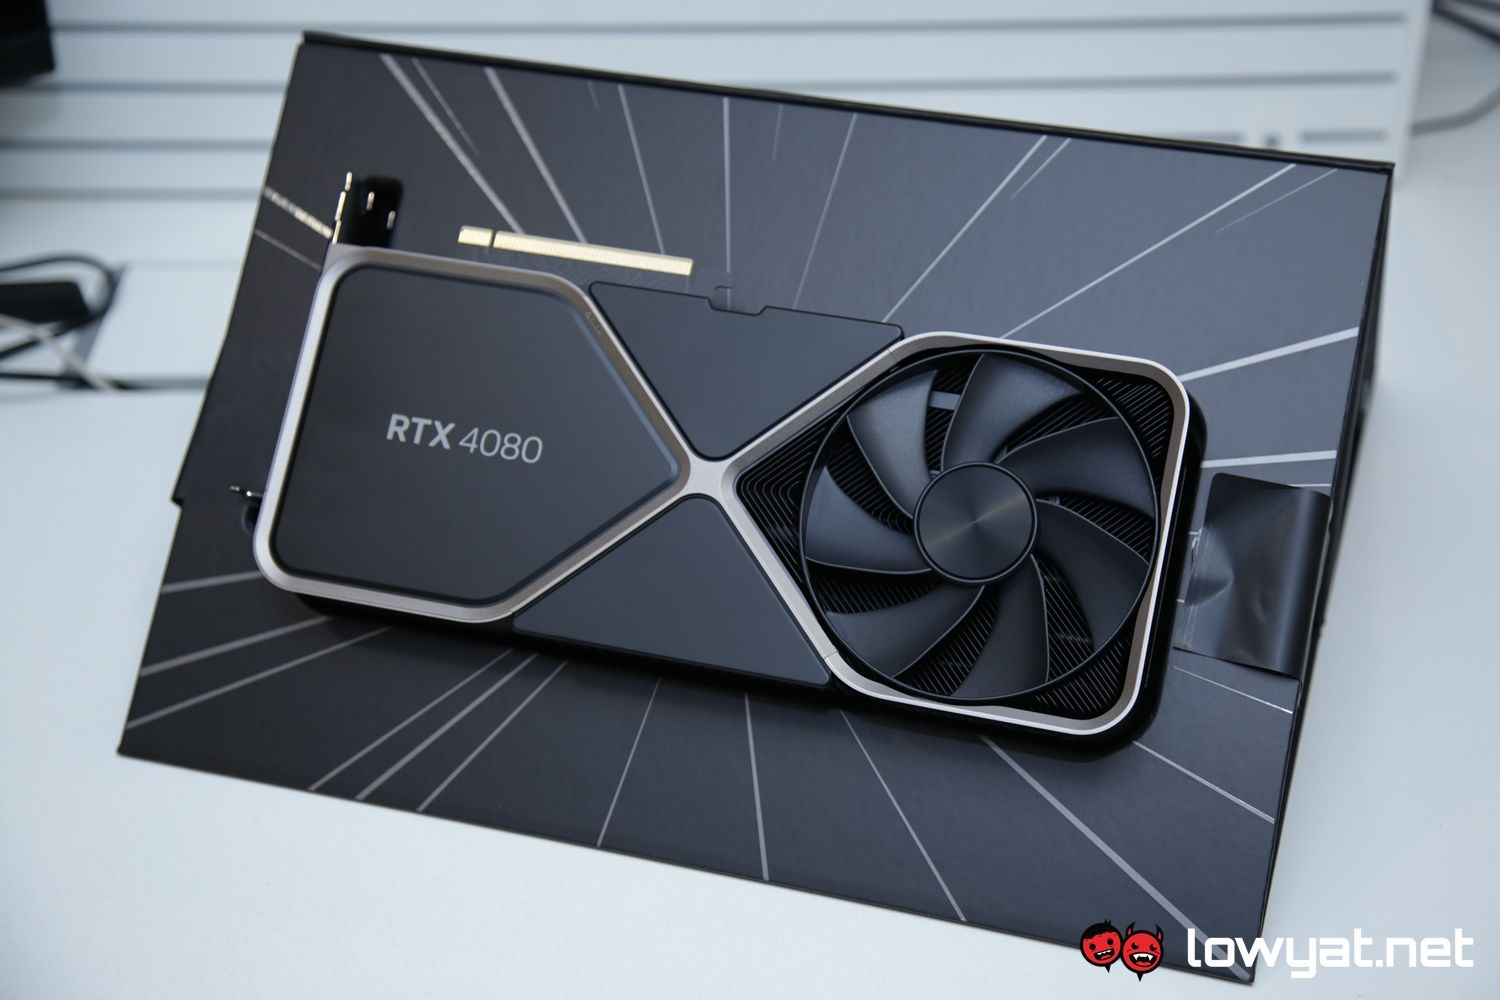 rtx 4080 now in stock